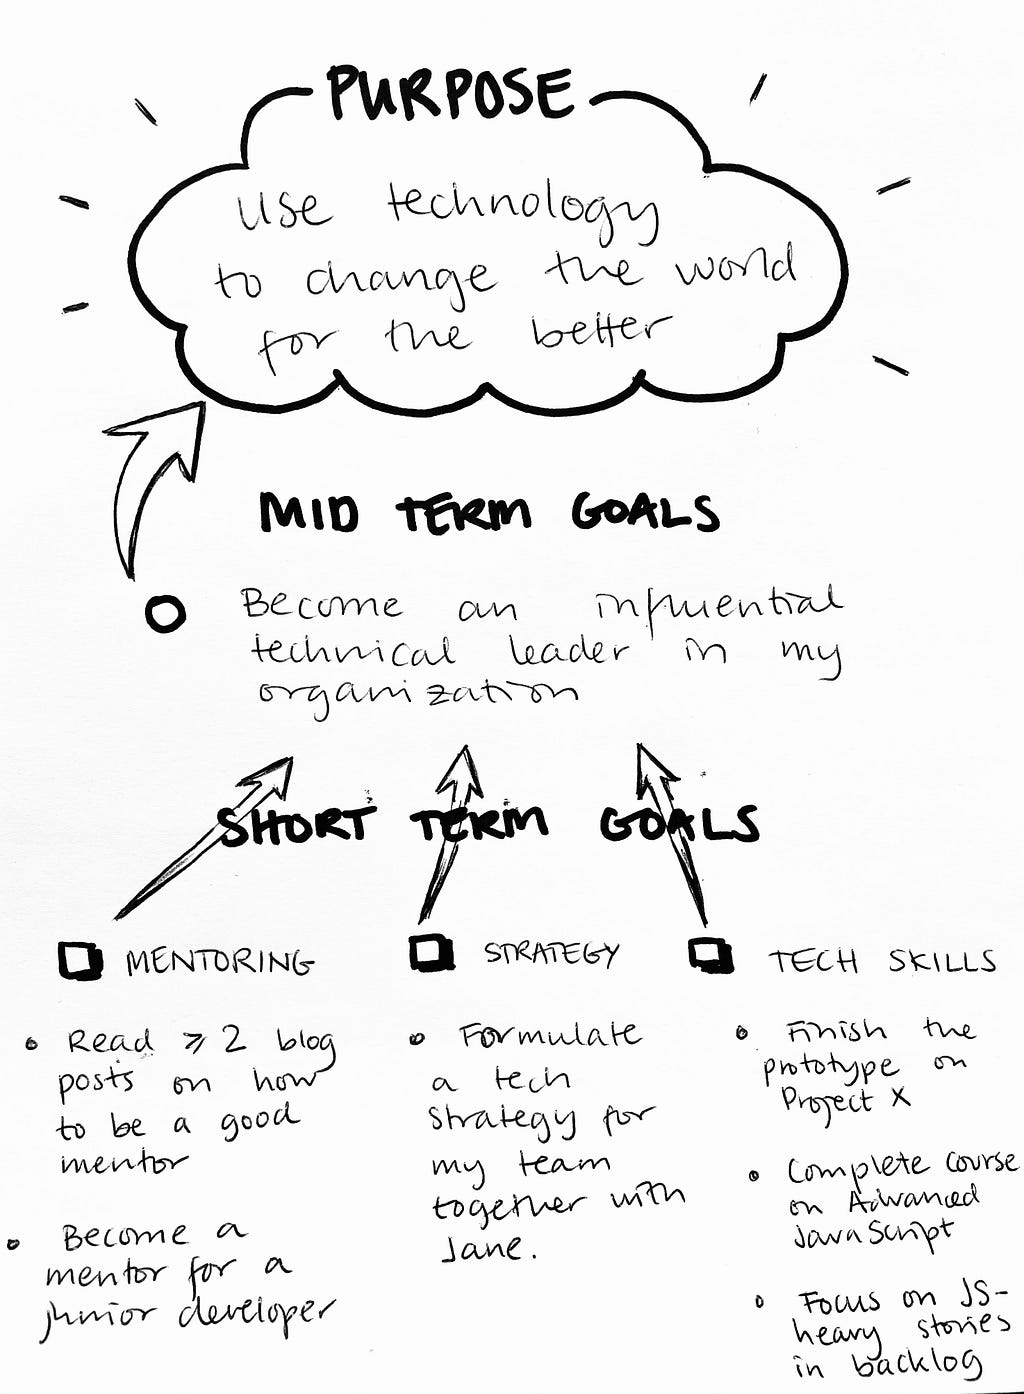 An example following the format described in this text. The purpose reads “Use technology to change the world for the better”, the mid term goal is to “become an influential technical leader” and the short term goals are concrete goals within three categories; Mentoring, Strategy and Tech skills.